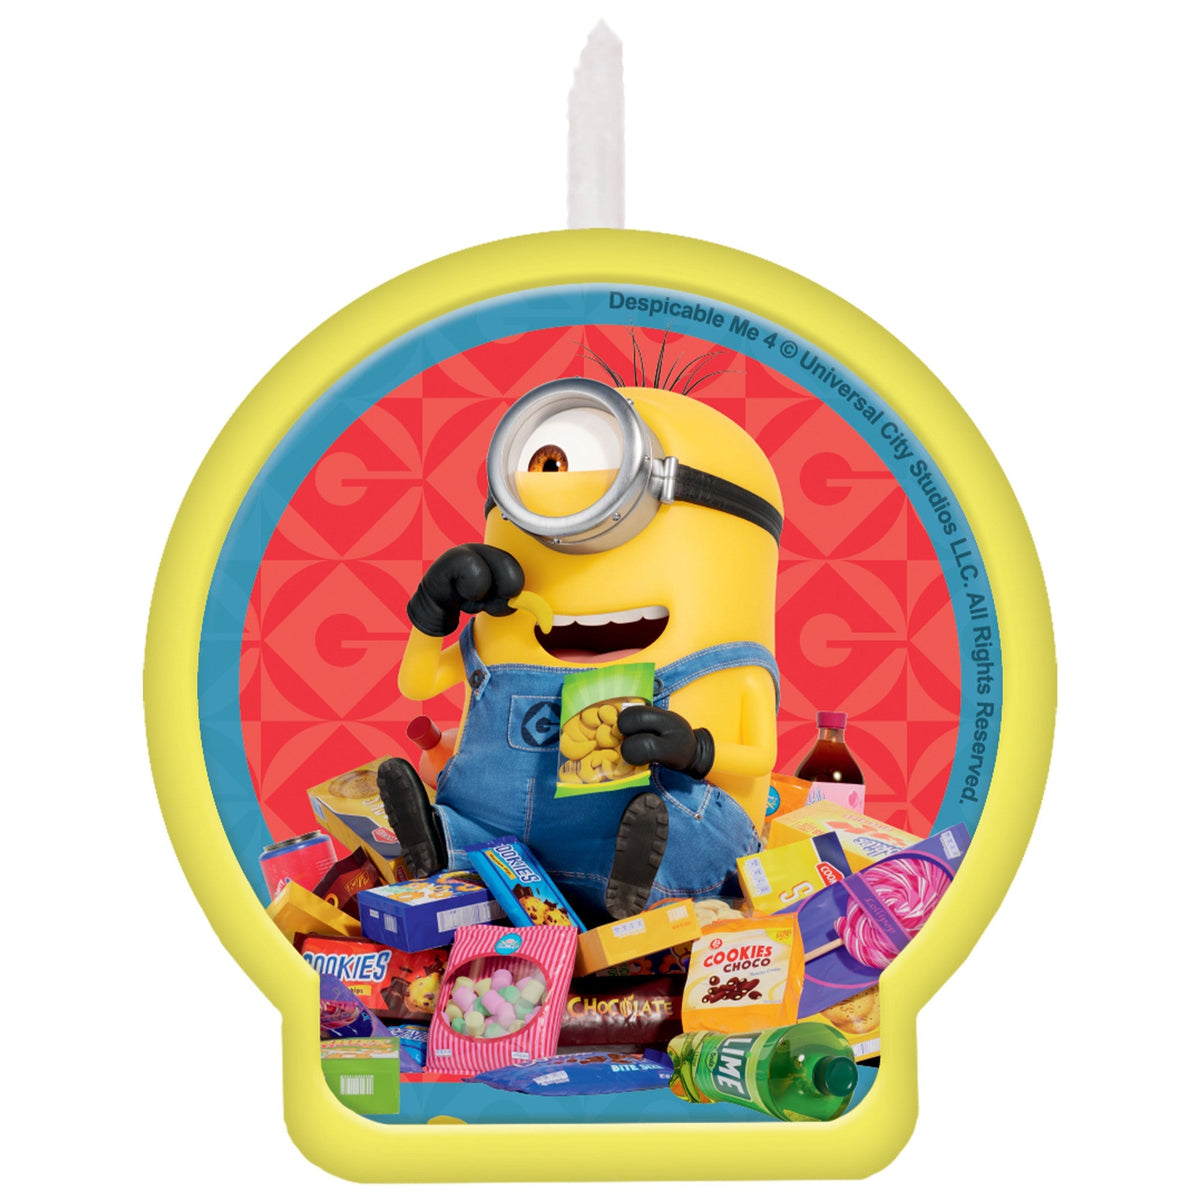 AMSCAN CA Kids Birthday Despicable Me 4 Birthday Candle, 1 Count 192937433416